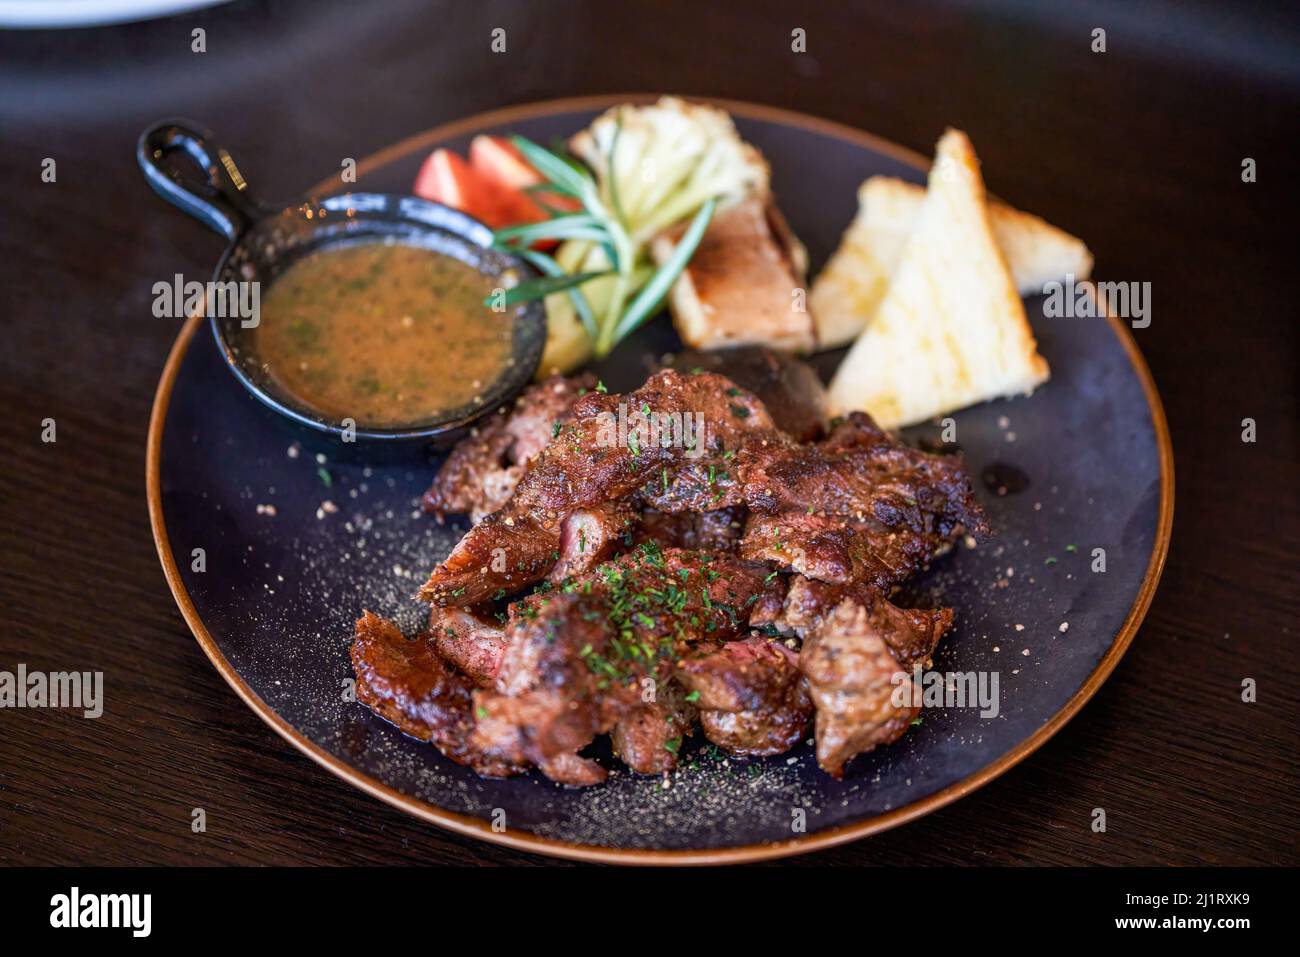 A delicious and tempting western steak, smoked grilled sirloin steak Stock Photo